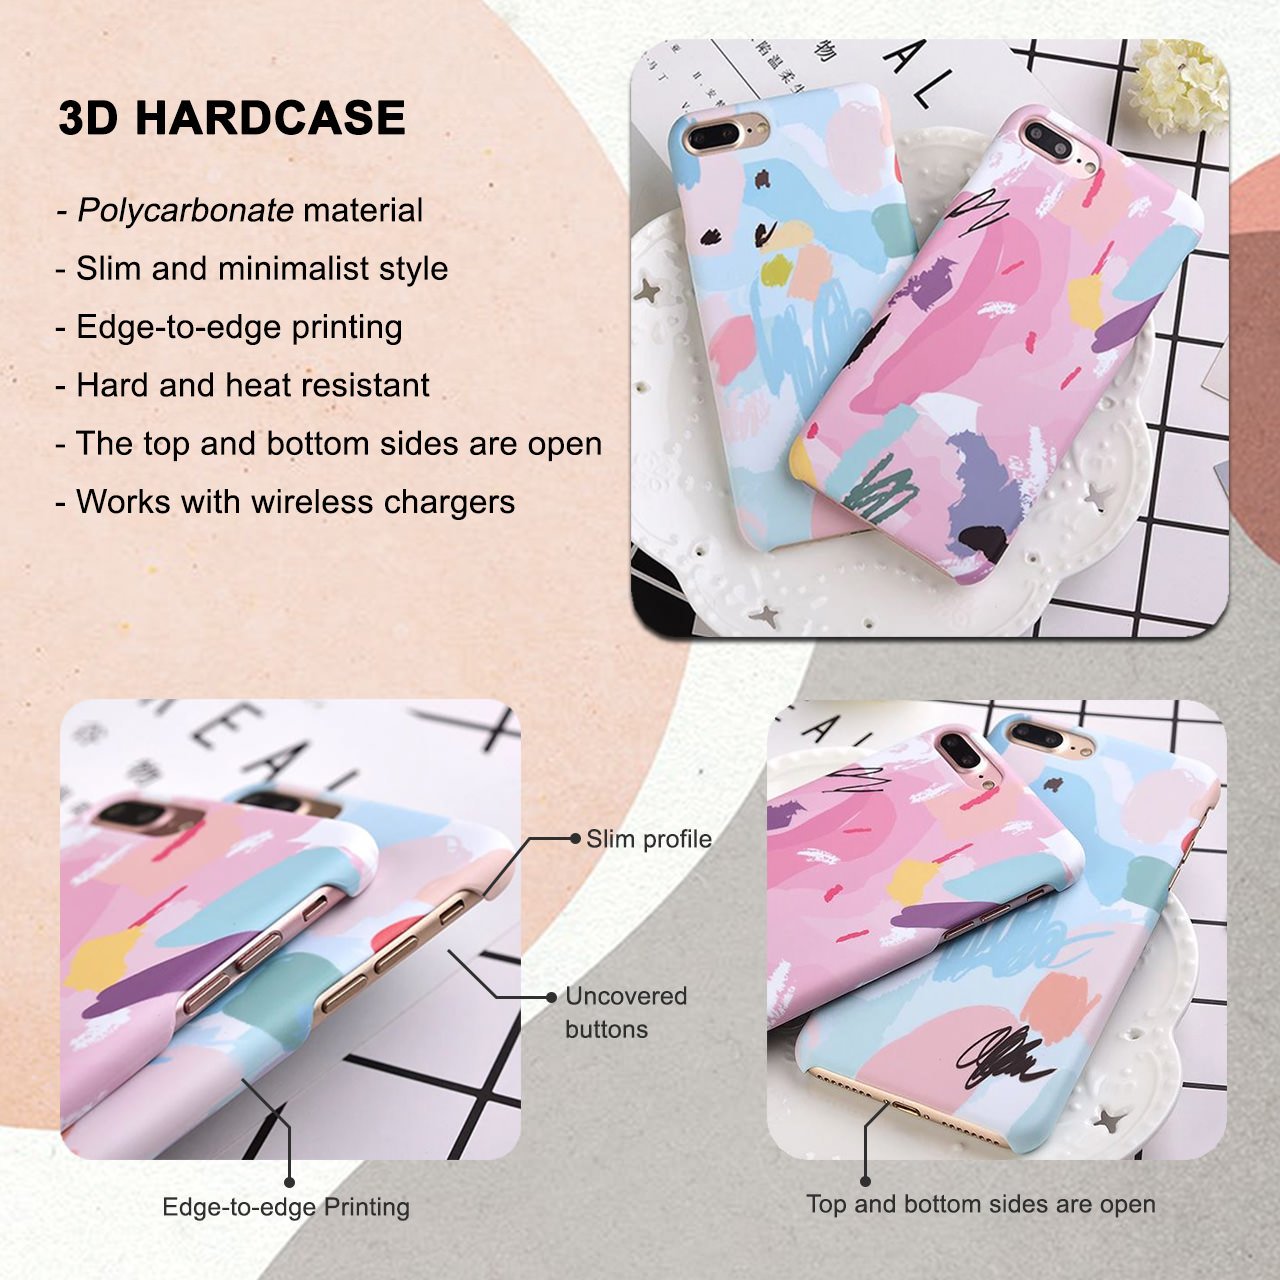 Abstract Colorful Doodle Art iPhone 6 / 6s Plus Case